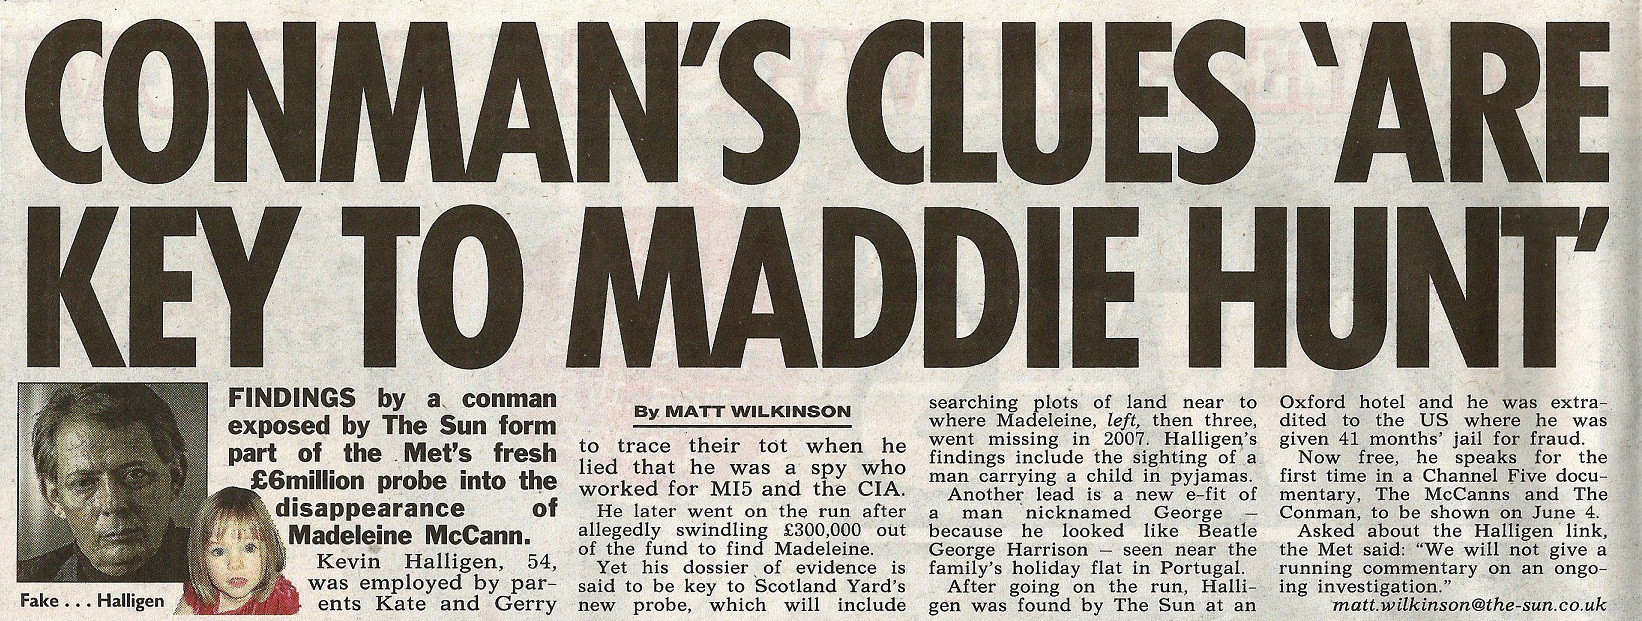 Conman's clues 'are key to Maddie hunt' - The Sun, 27 May 2014 (paper edition, page 8)